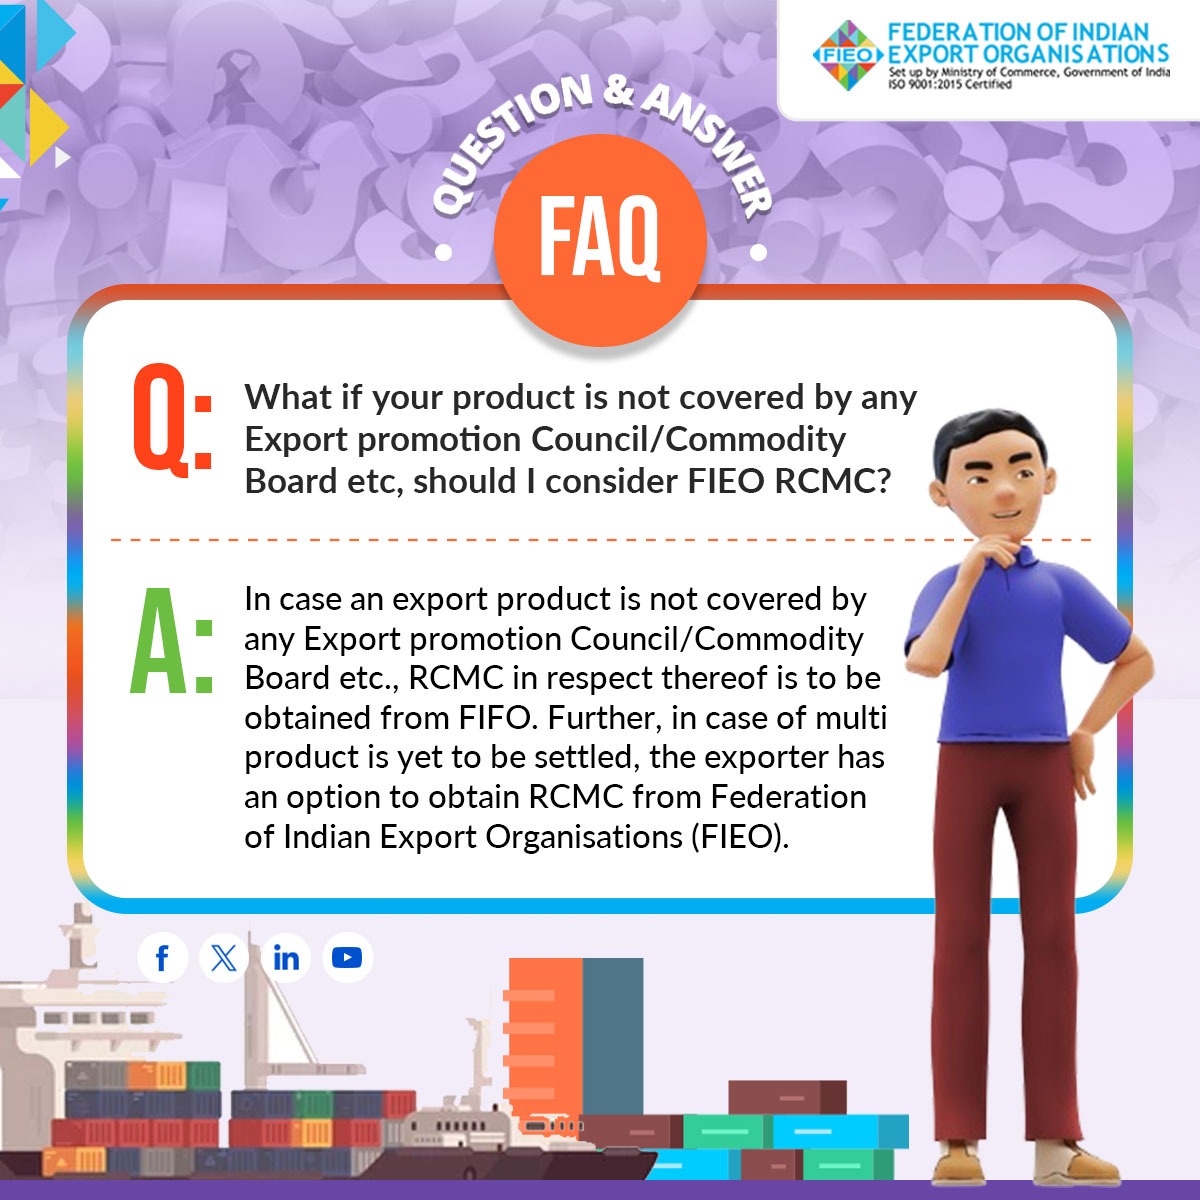 Joining FIEO?🌍Curious about the perks? Check out our FAQs to get answers!

Today's FAQ: What if your product is not covered by any Export promotion Council/Commodity Board etc, should I consider FIEO RCMC?

Visit➡️fieo.org to learn more!

#FIEOFAQs